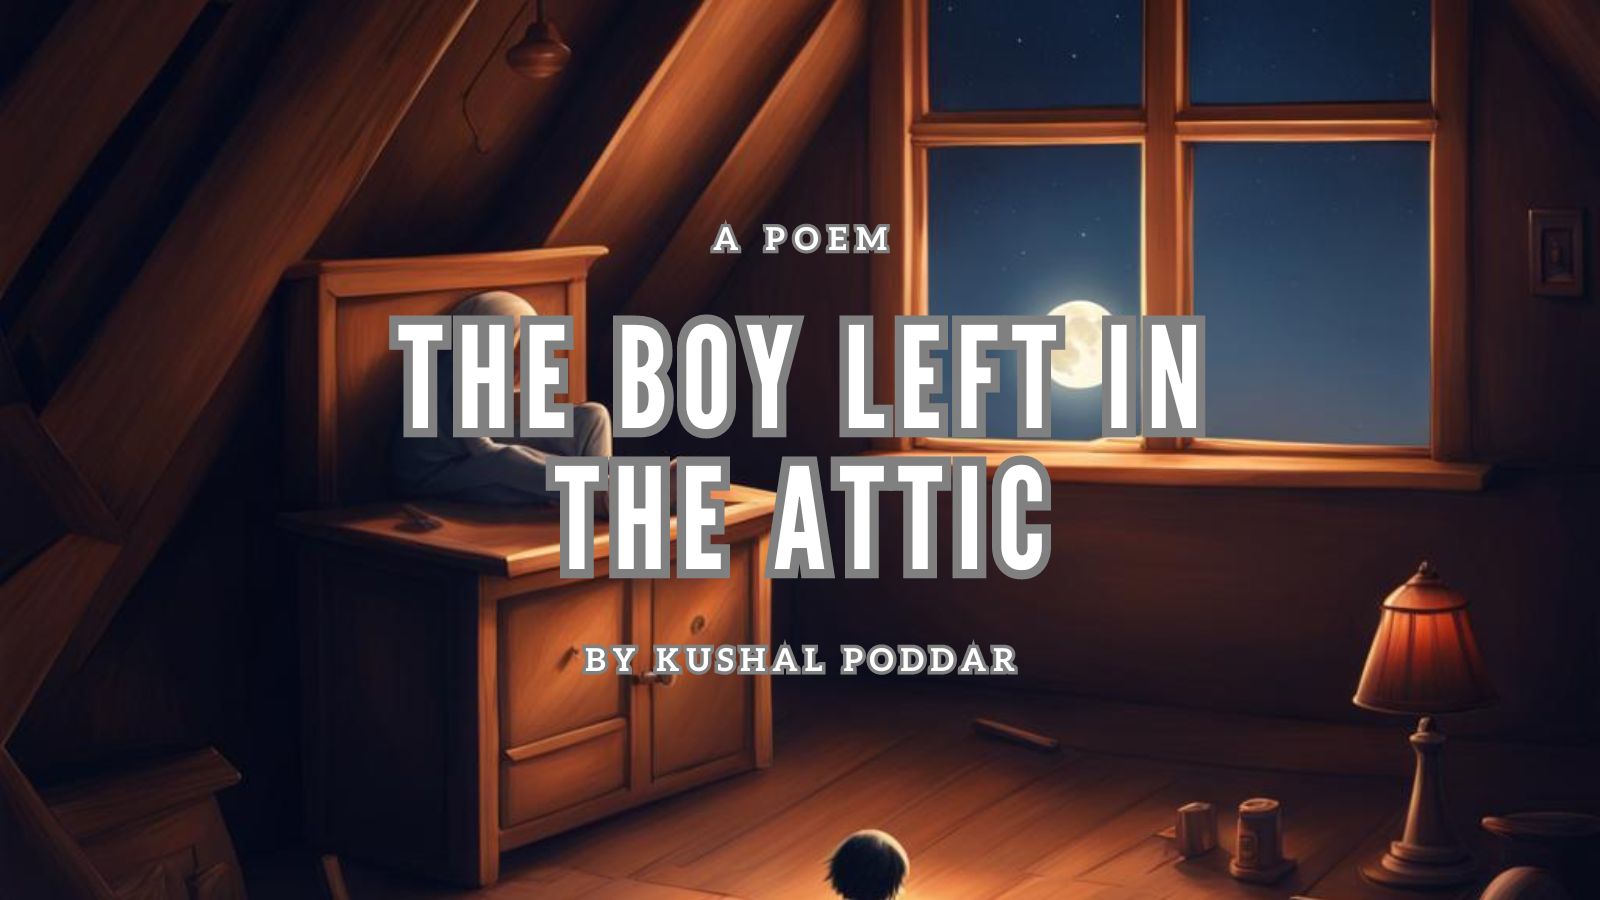 The Boy Left In The Attic by Kushal Poddar